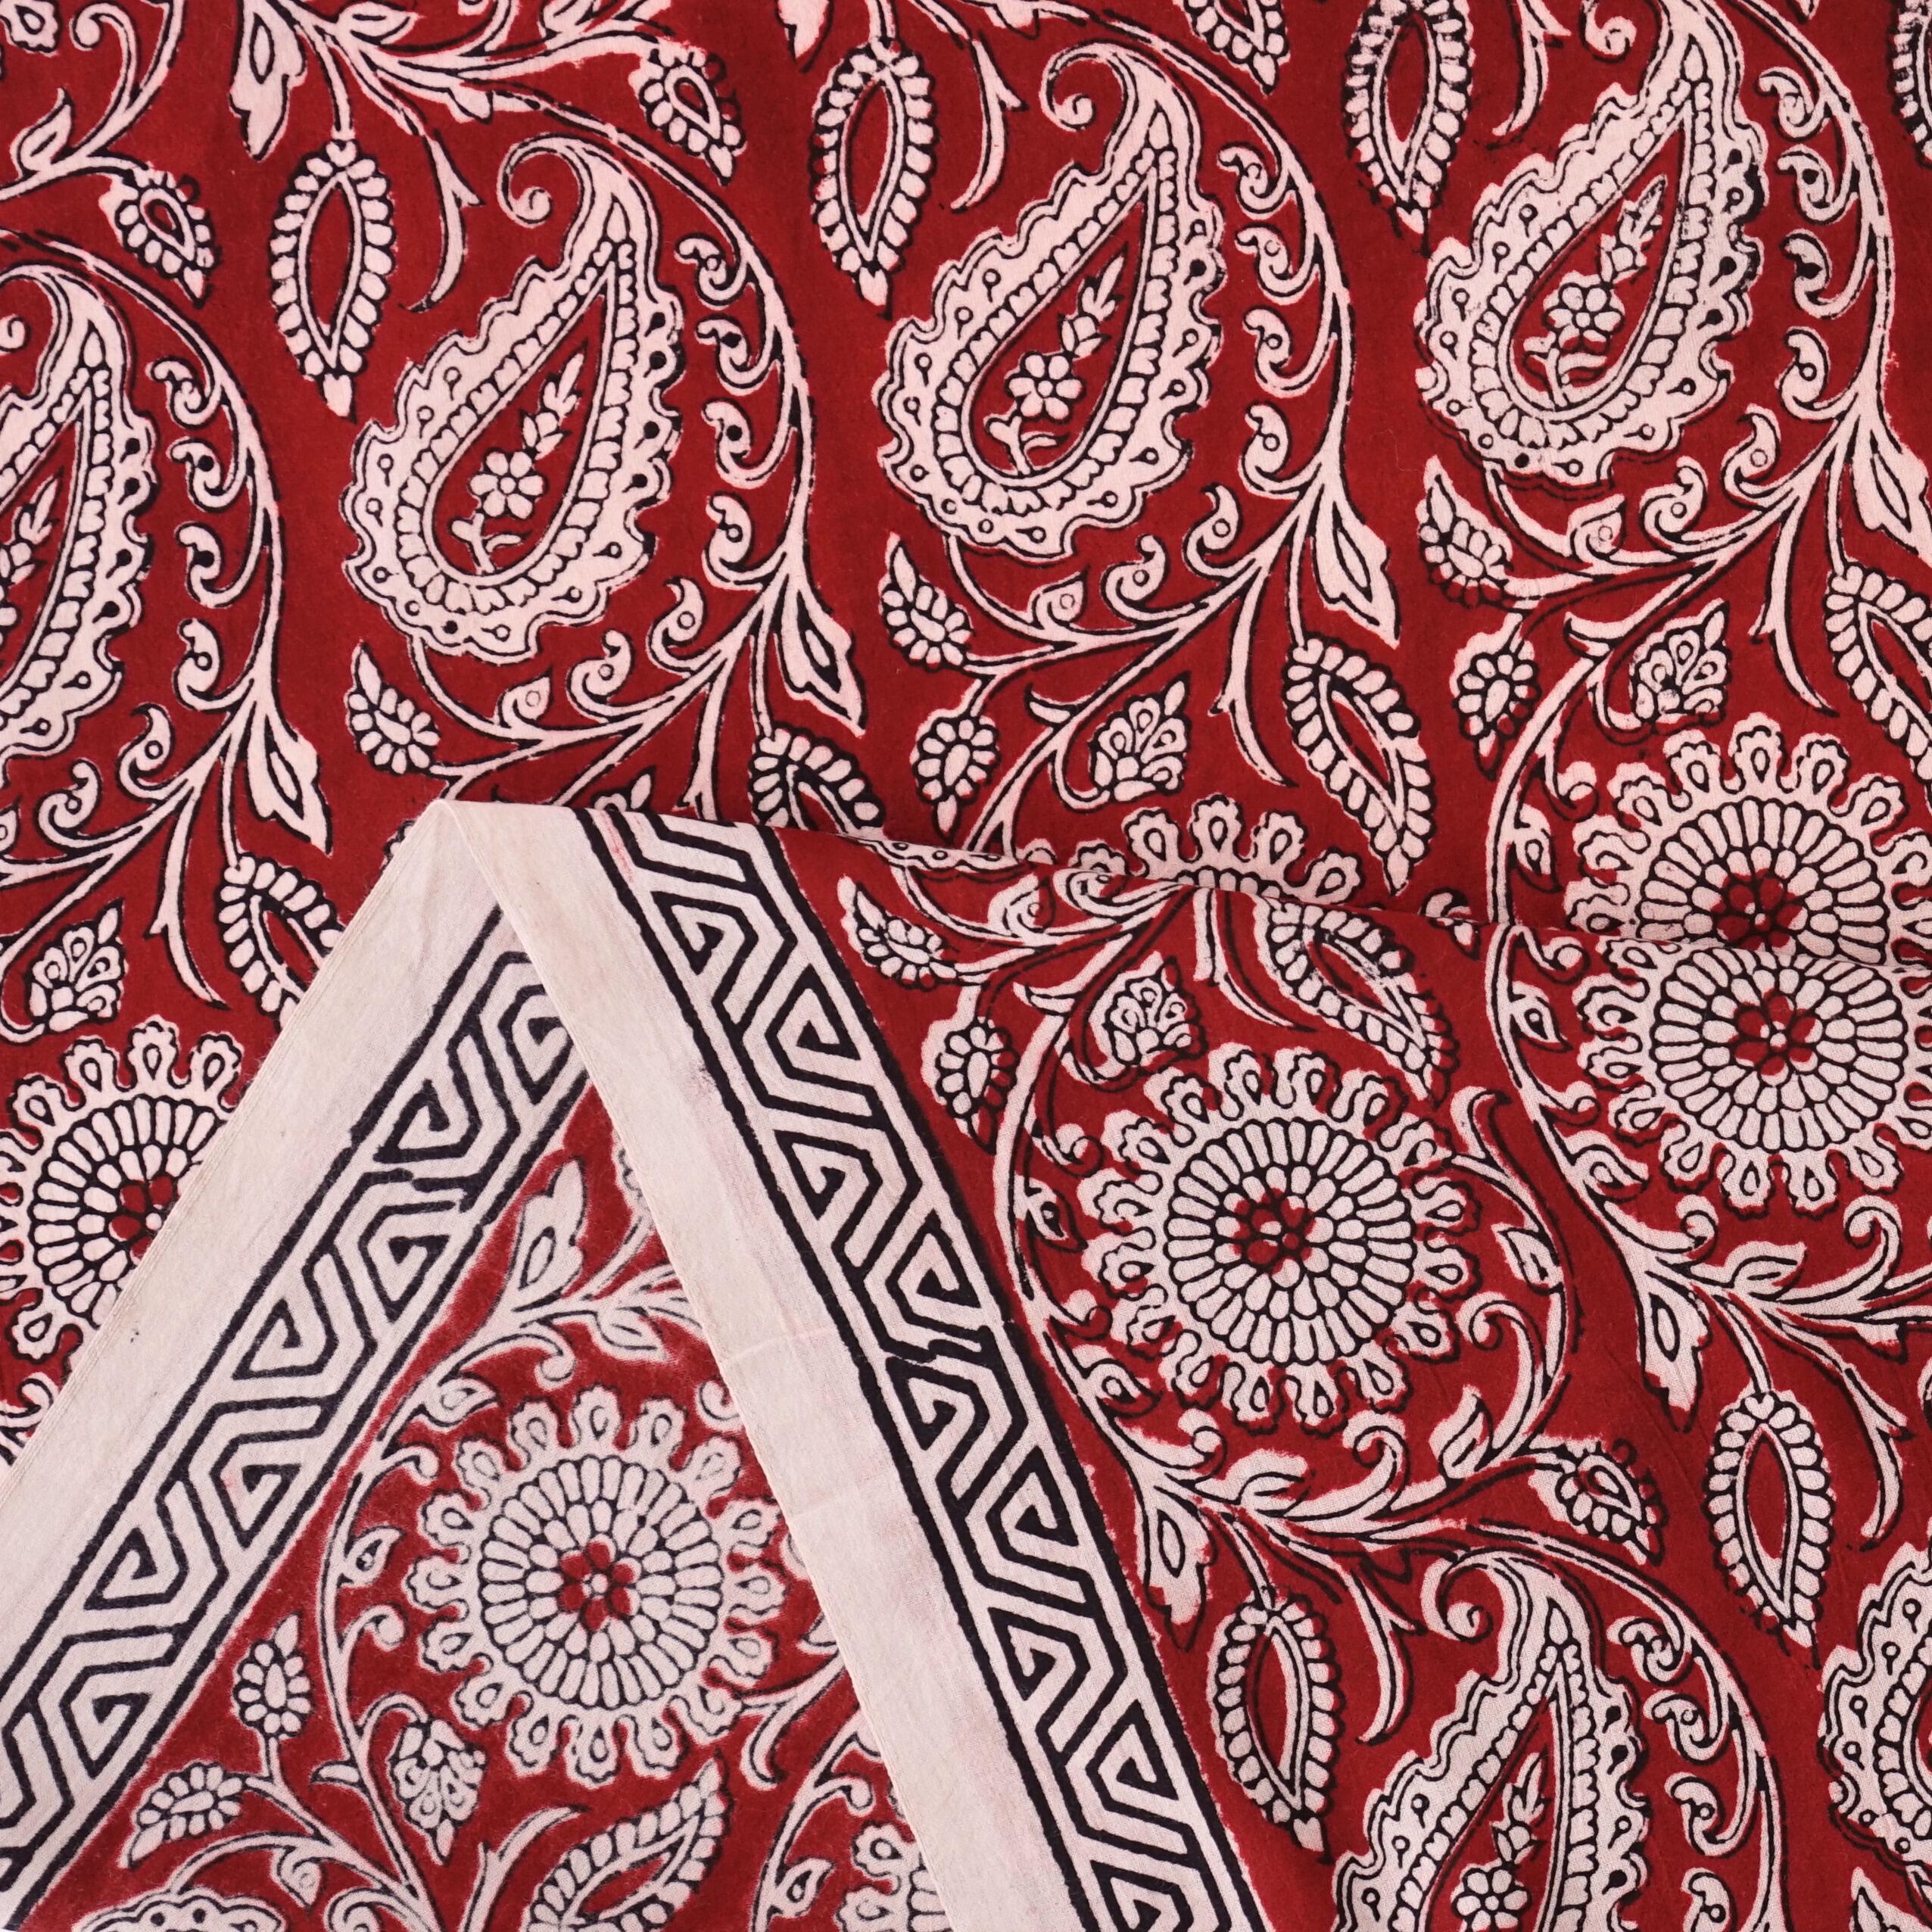 4 - ISK11 - 100% Block-Printed Cotton Fabric From India - Sichuan Pepper Design - Iron Rust Black & Alizarin Red Dyes - Selvedge